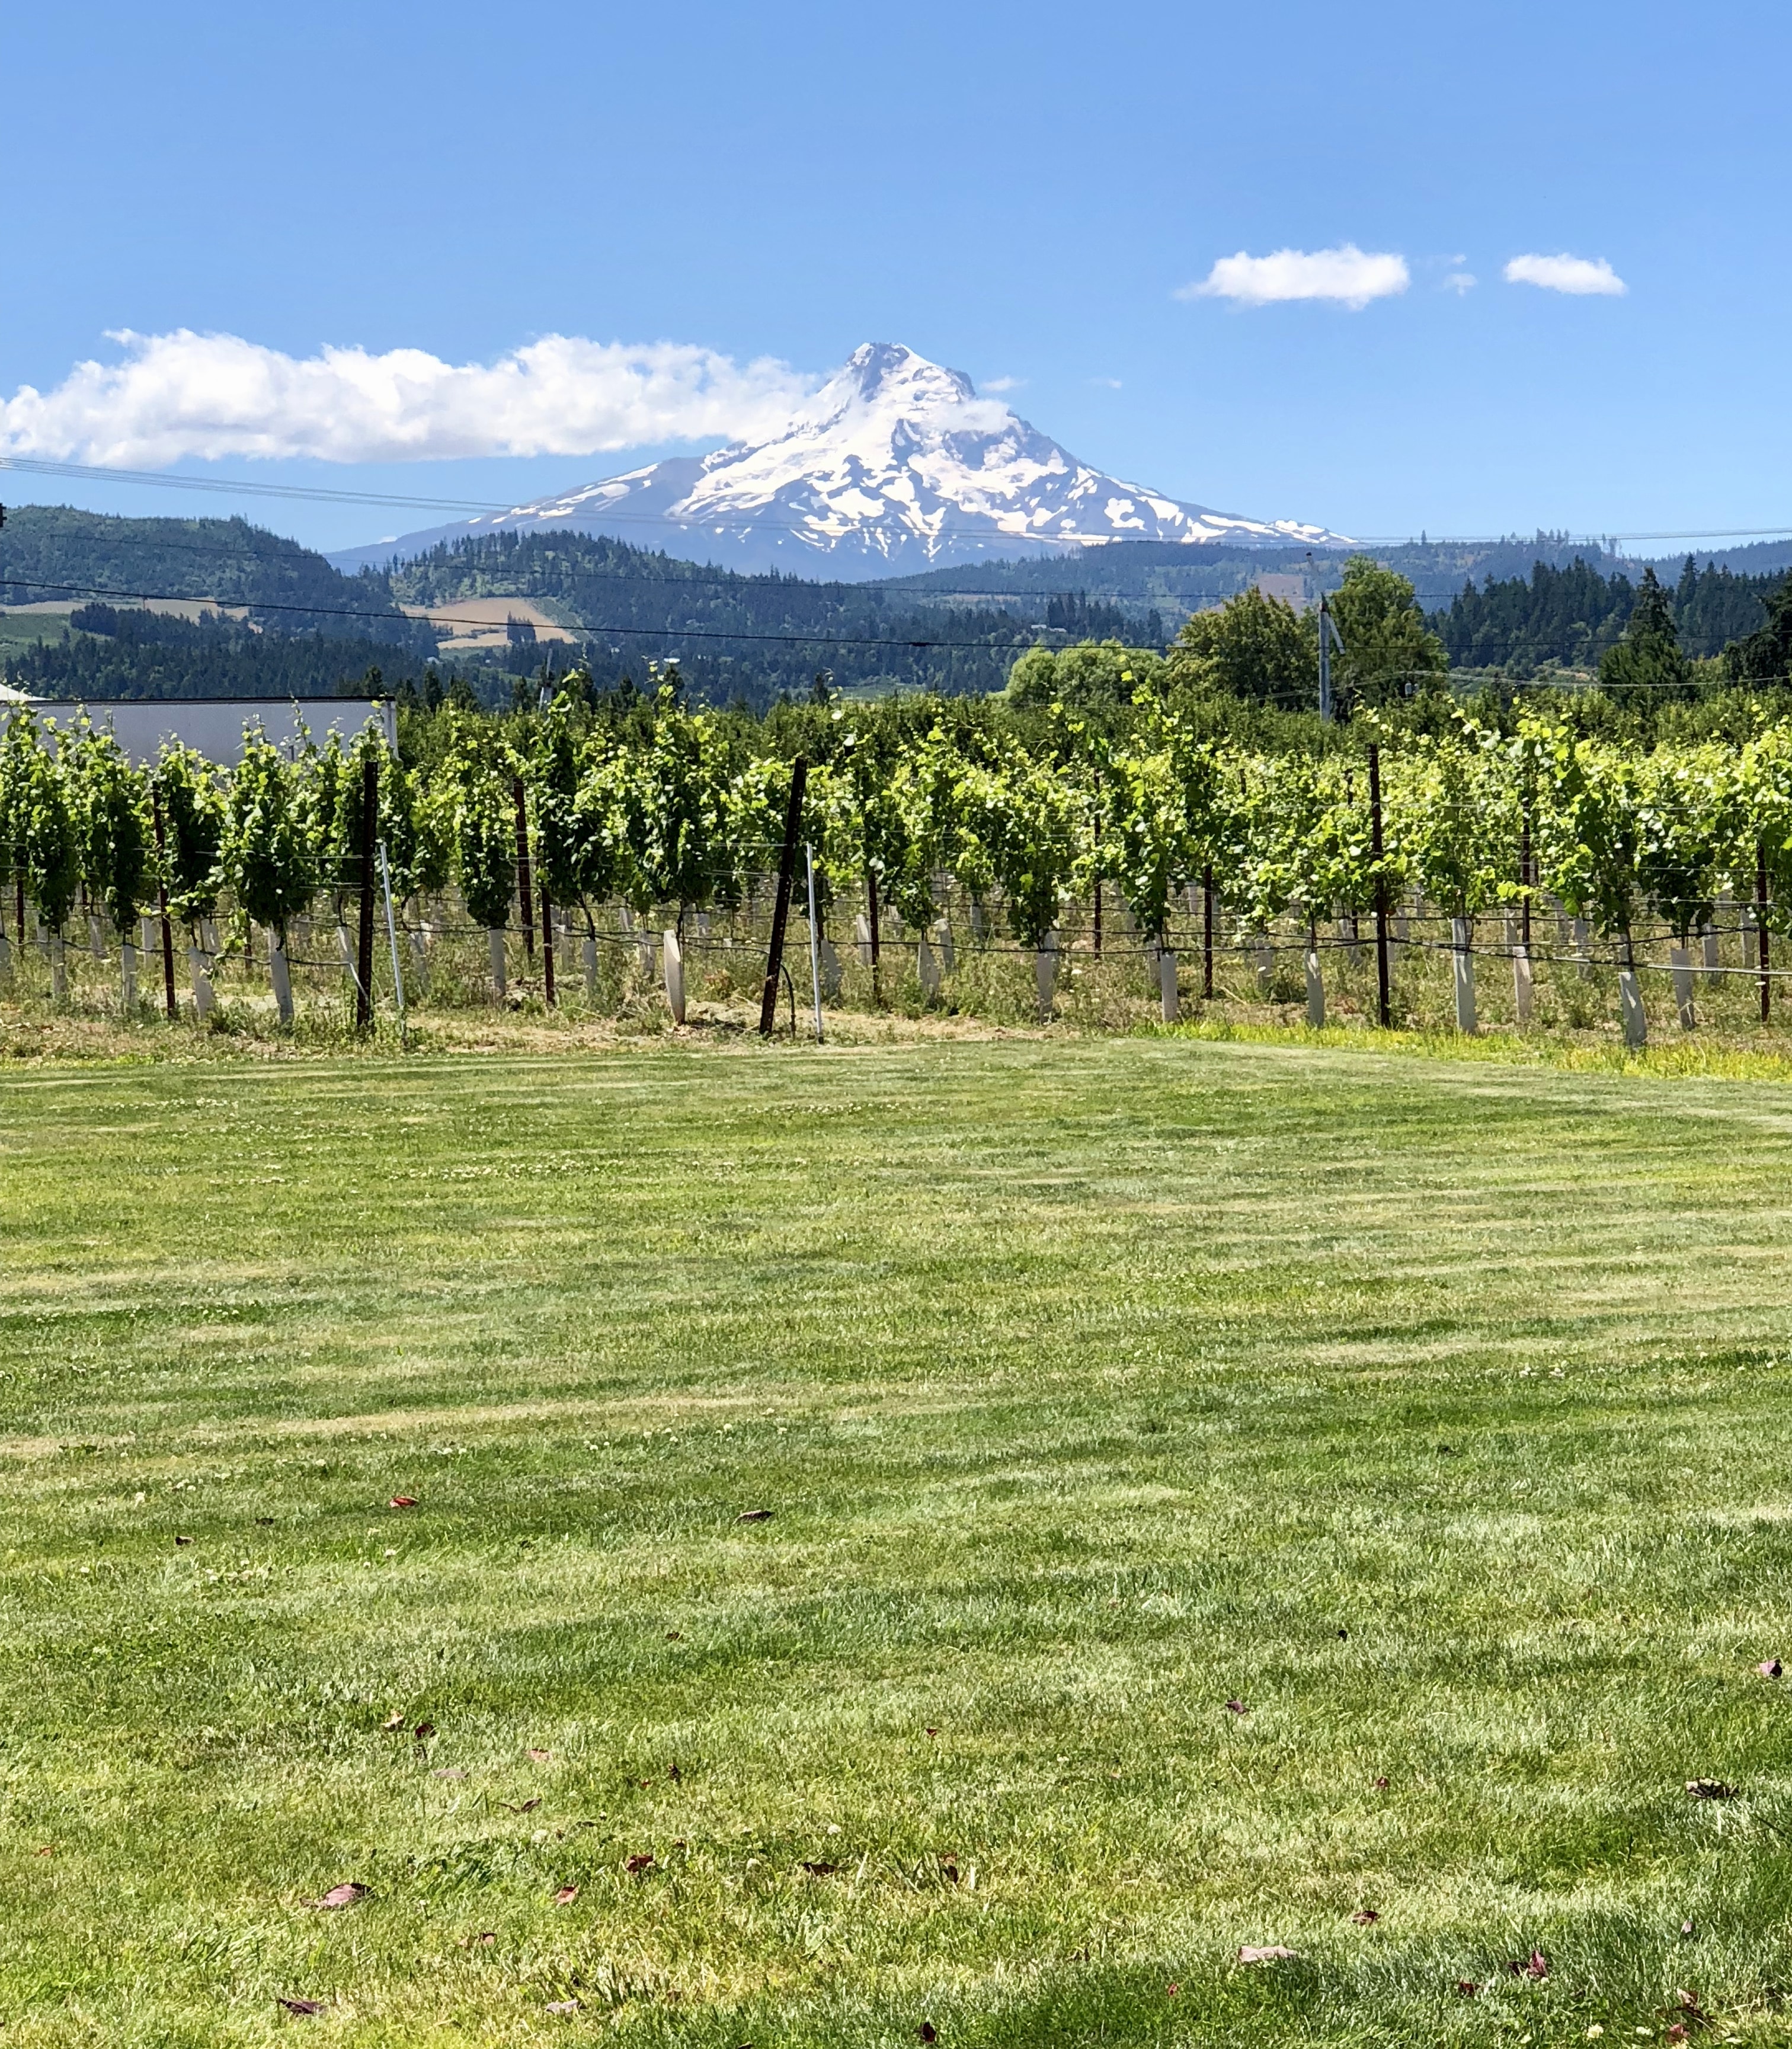 The Vineyards and Mt Hood